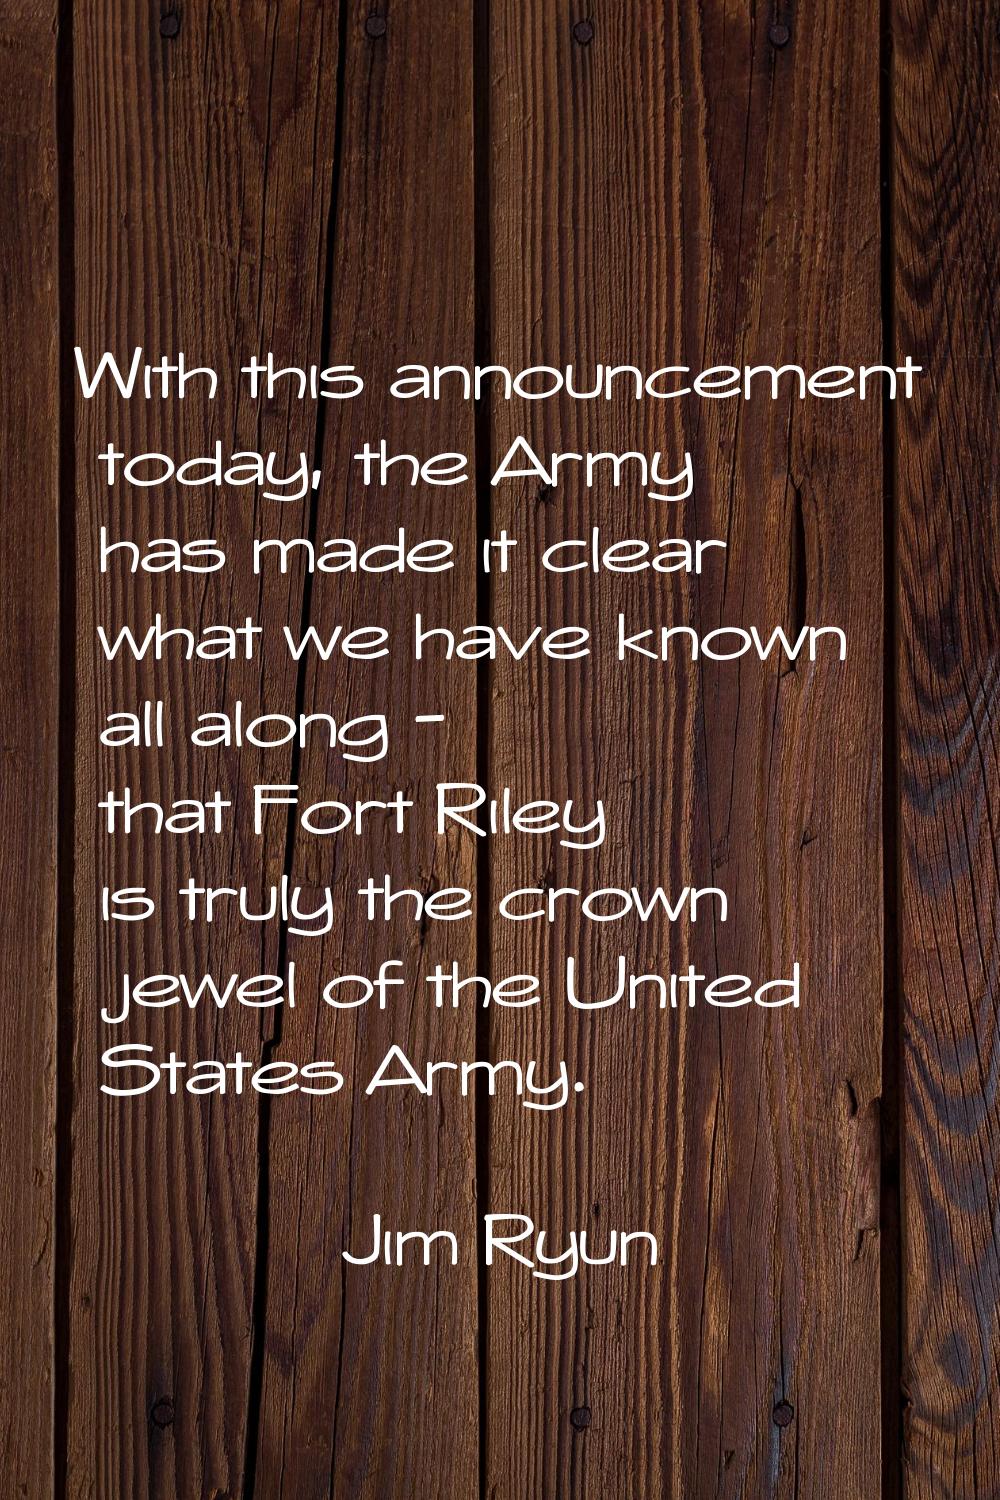 With this announcement today, the Army has made it clear what we have known all along - that Fort R